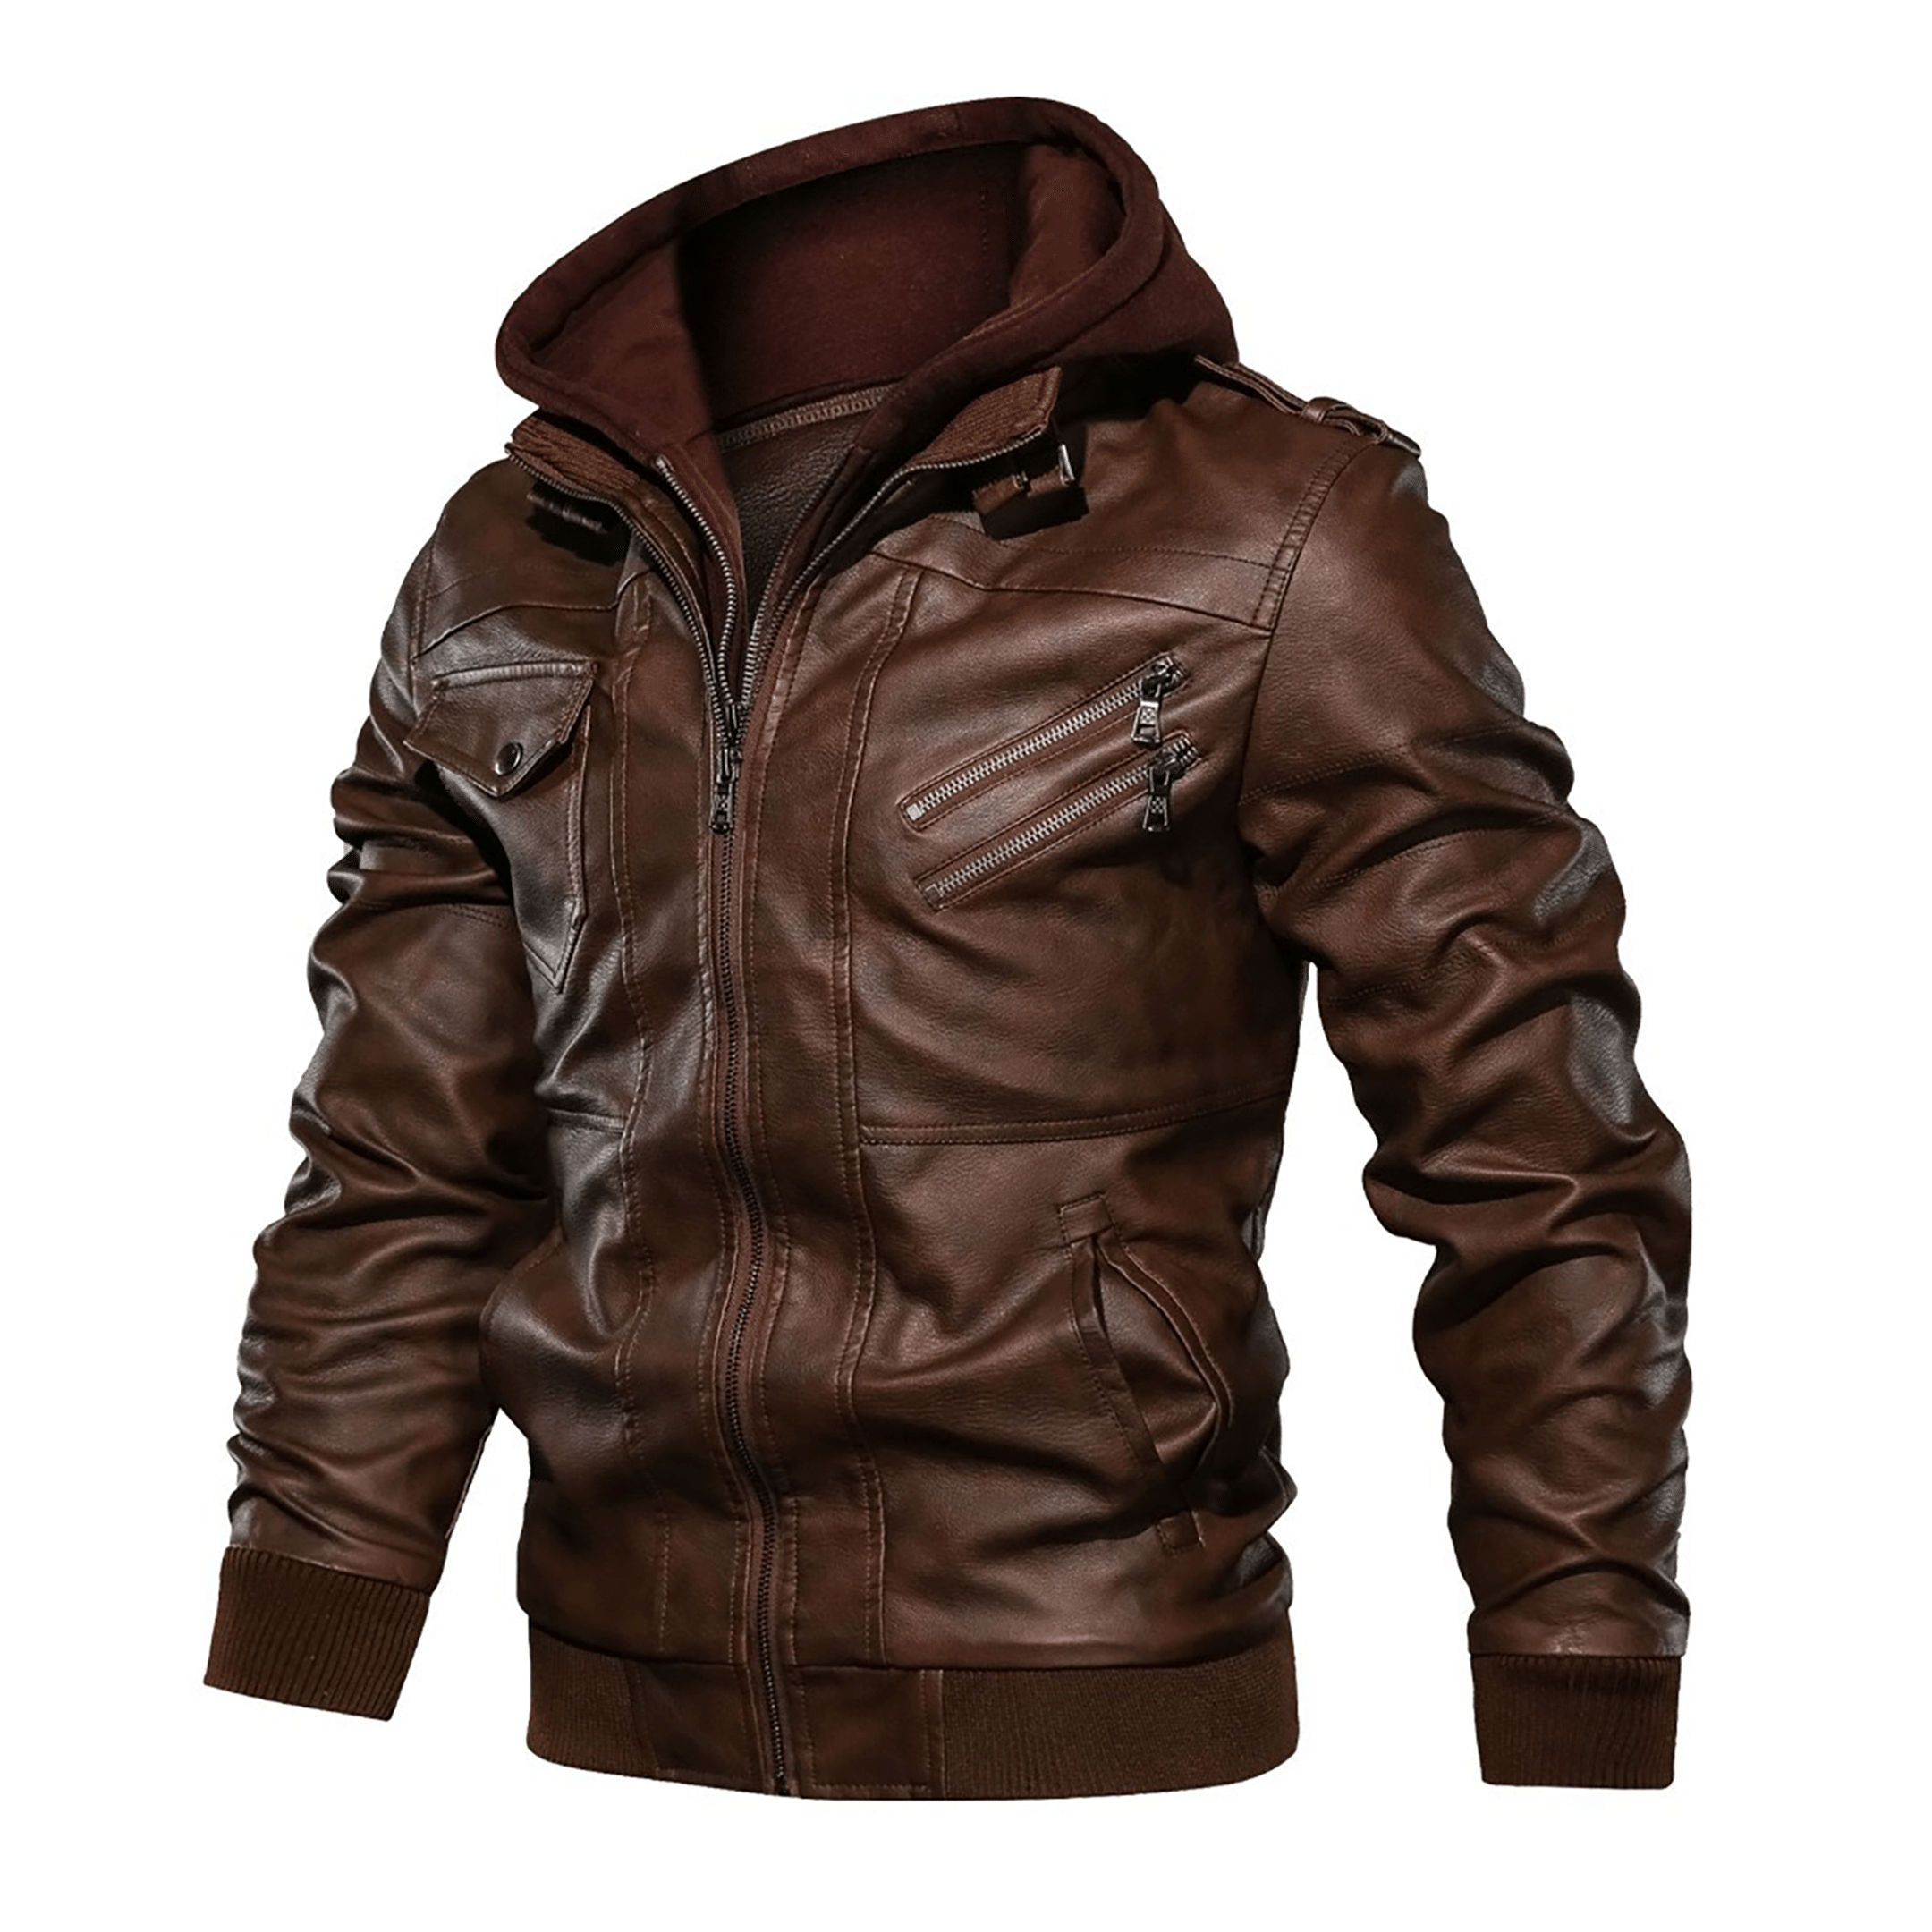 Top leather jackets and latest products 275